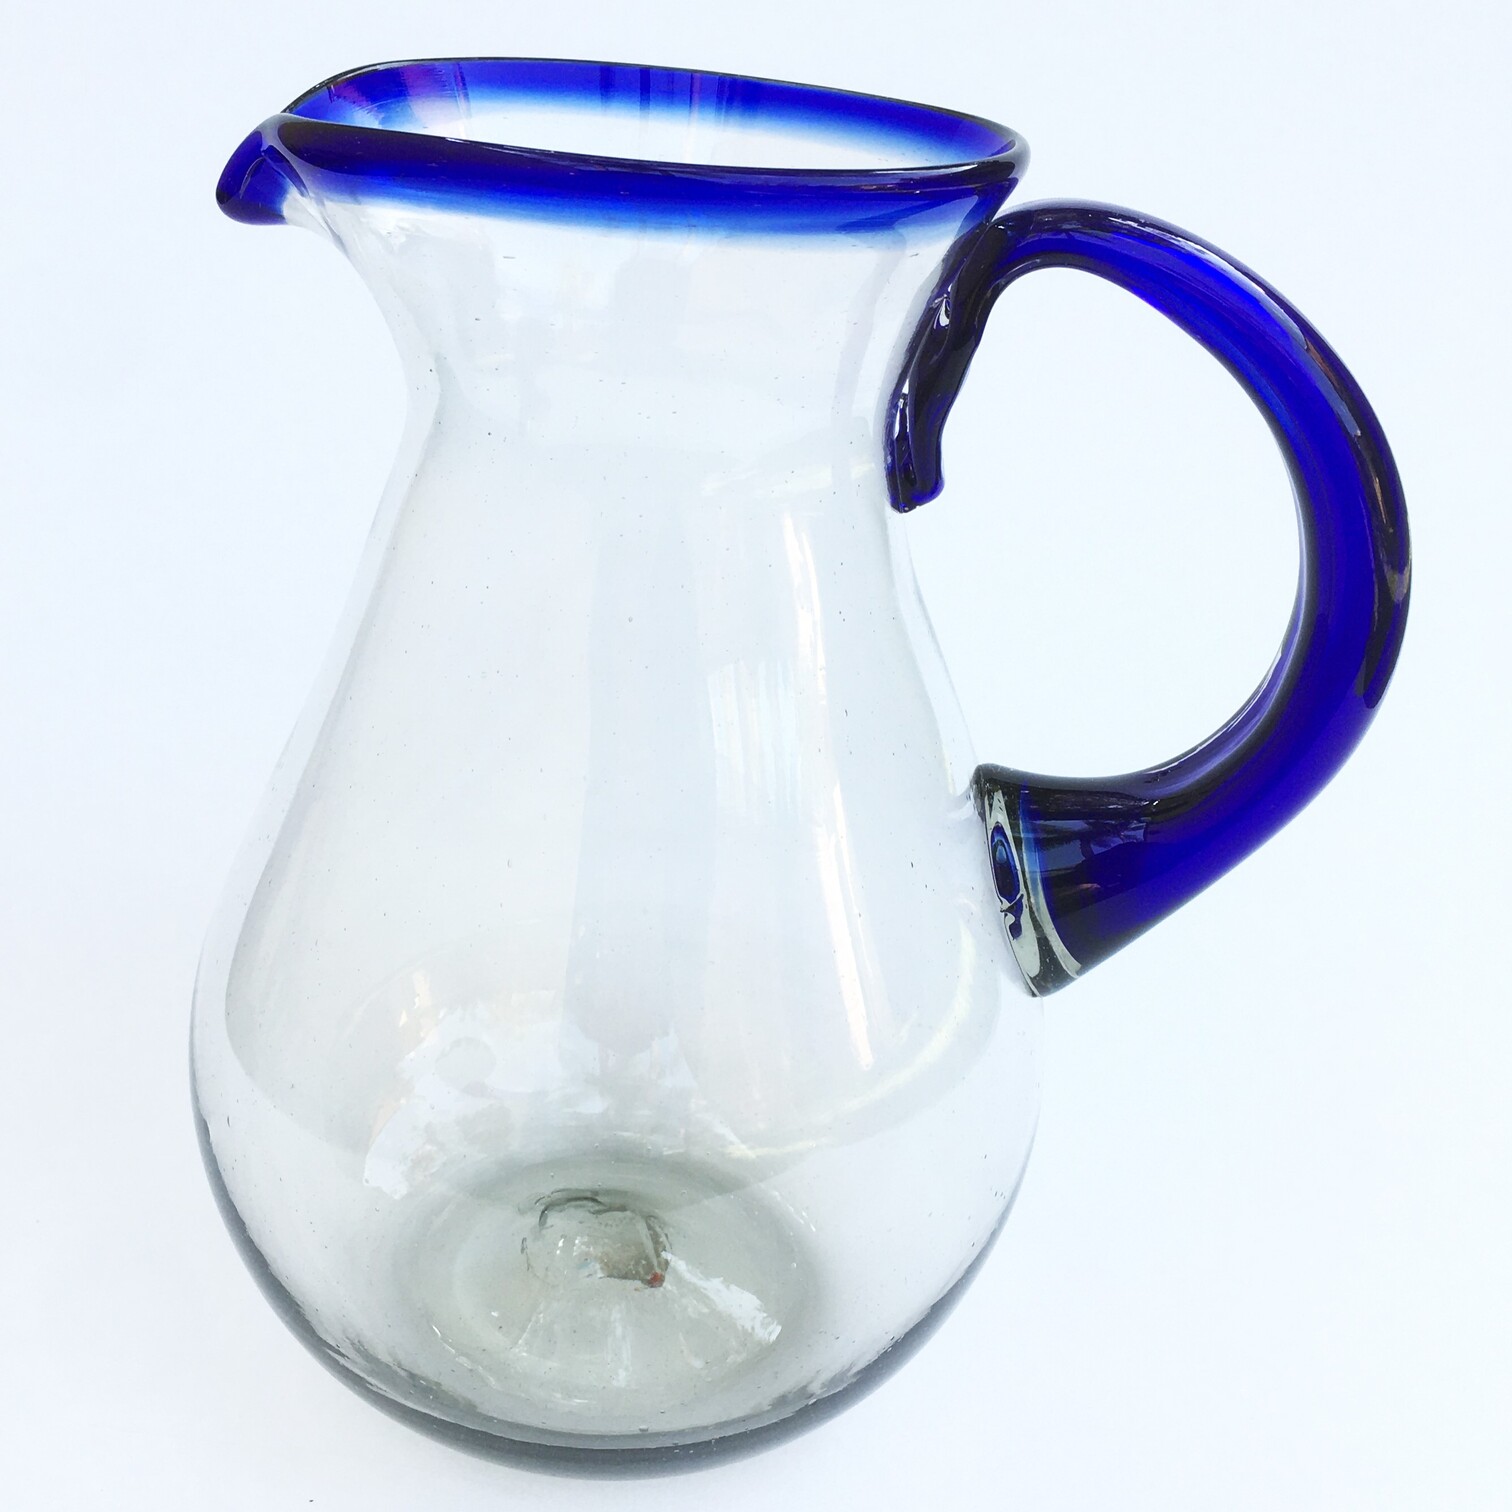 Cobalt Blue Rim Glassware / Cobalt Blue Rim Tall Pear Pitcher / This classic pitcher is perfect for pouring out all kinds of refreshing drinks.